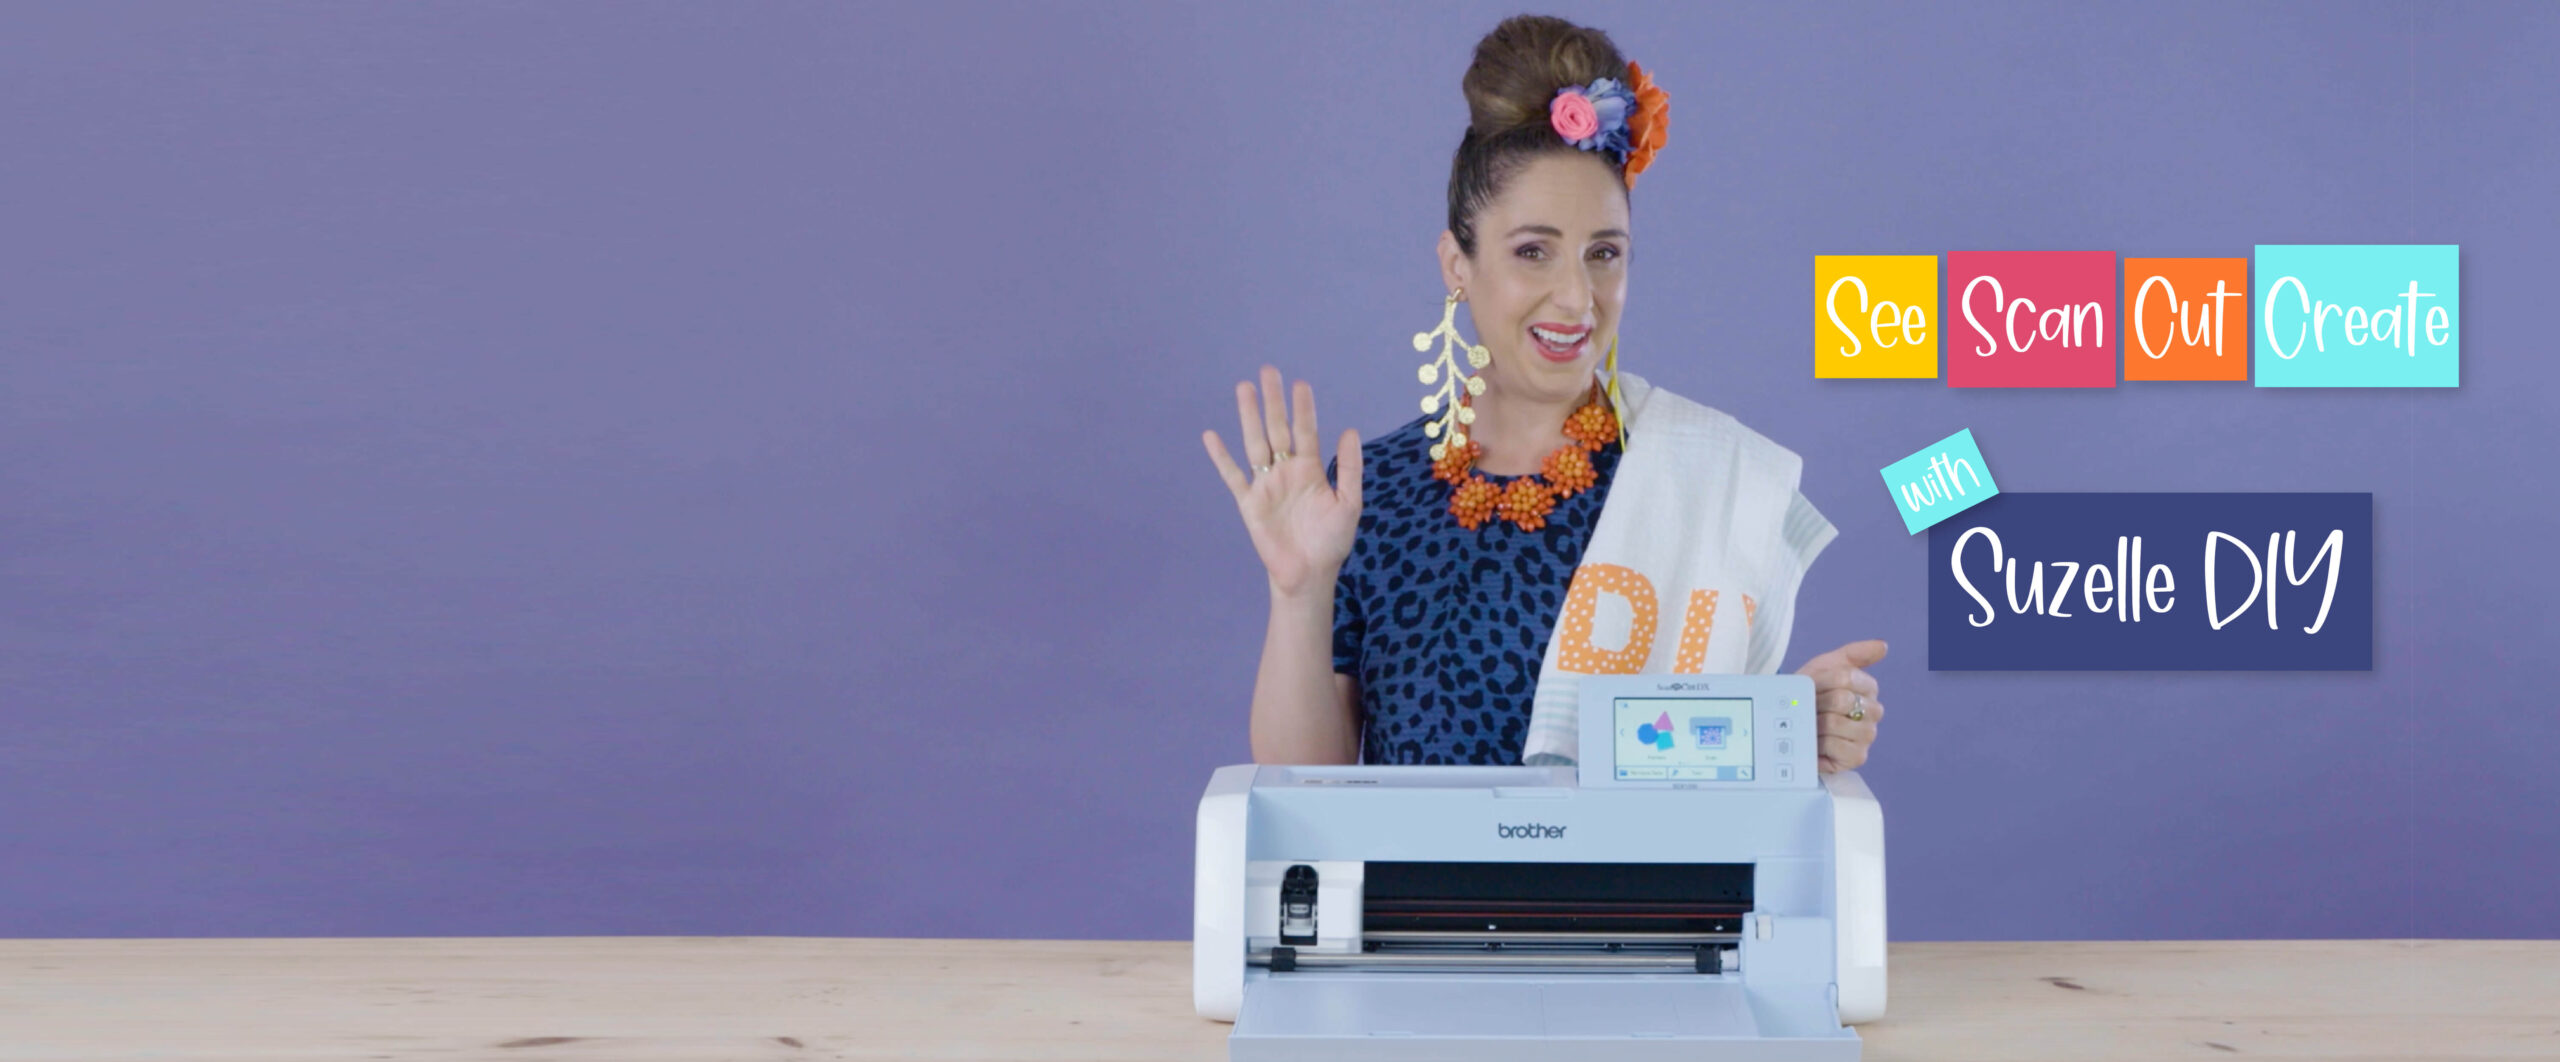 See. Scan. Cut. Create with Suzelle DIY